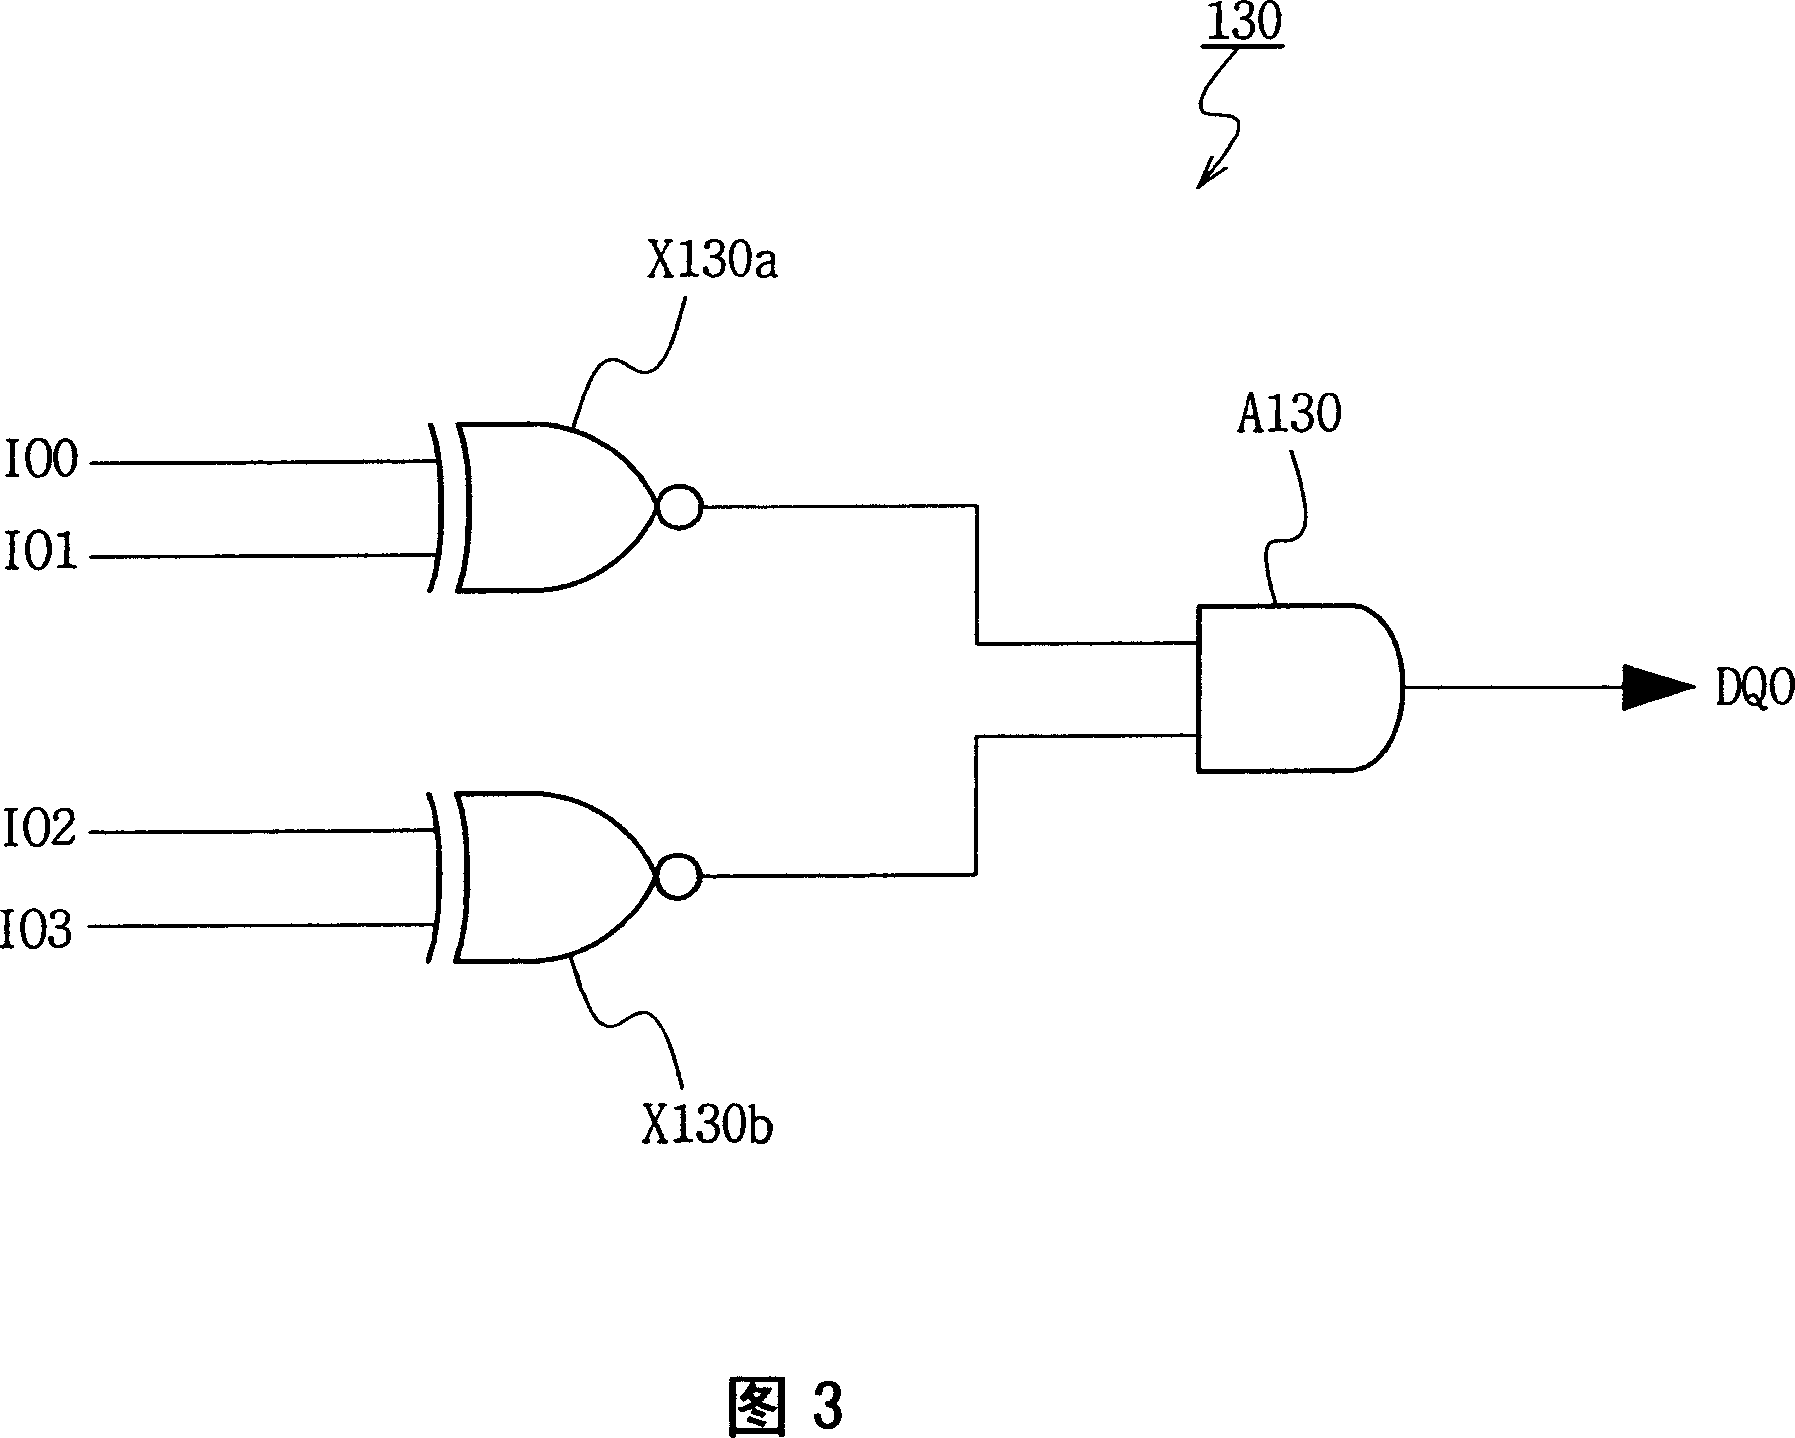 Parallel bit test circuits for testing semiconductor memory devices and related methods